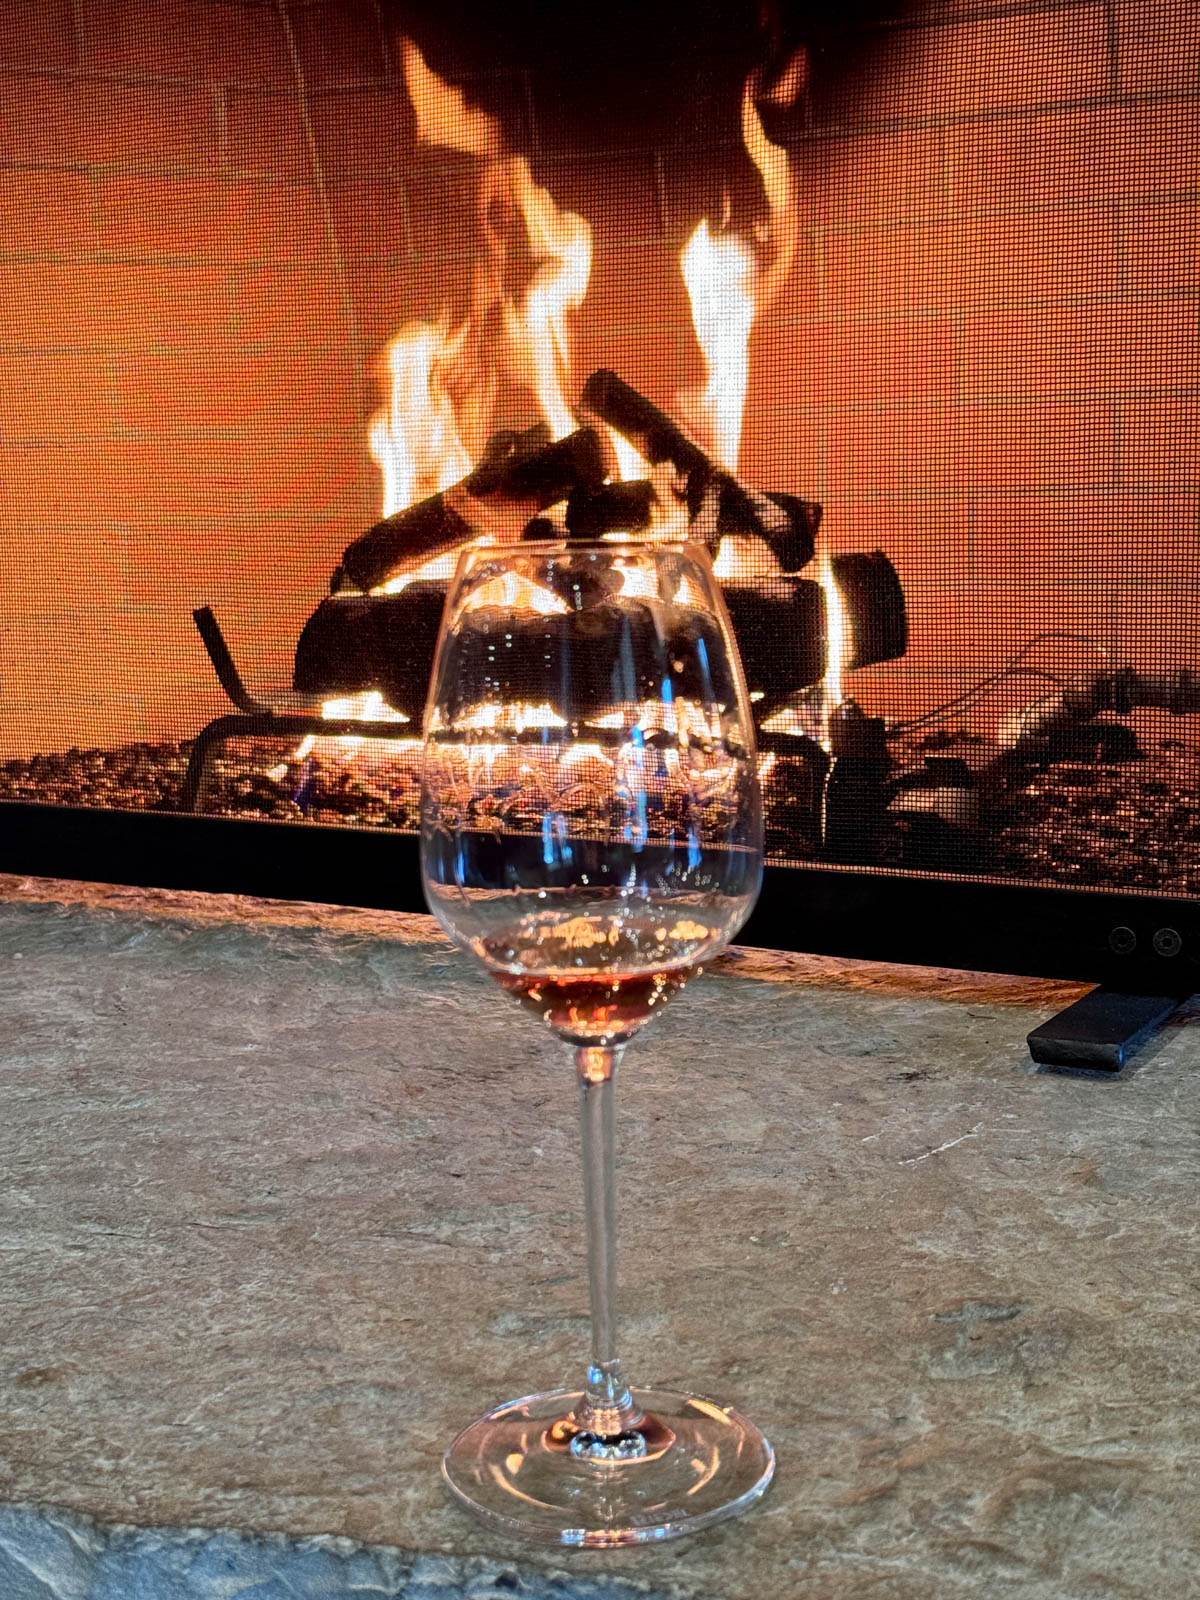 Glass of wine in front of a fireplace.